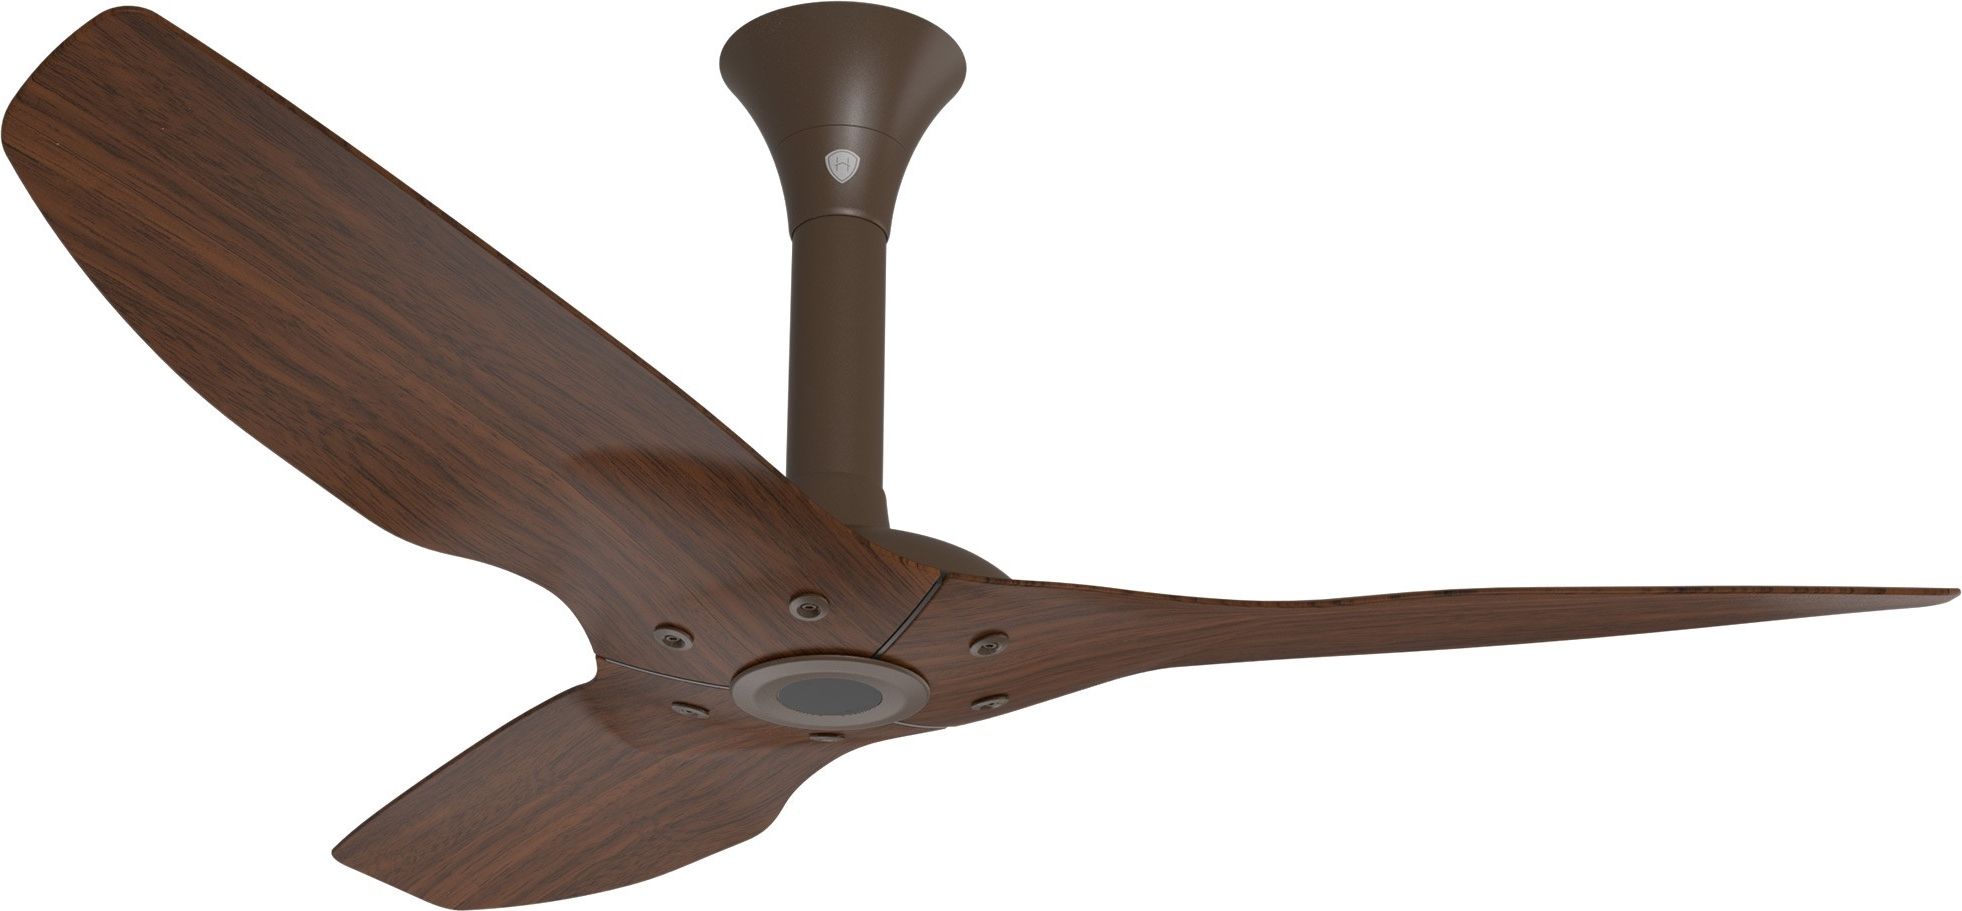 Outdoor Ceiling Fans With Speakers For Most Recent Haiku Outdoor Ceiling Fan: 52", Cocoa Woodgrain Aluminum, Standard (View 6 of 20)